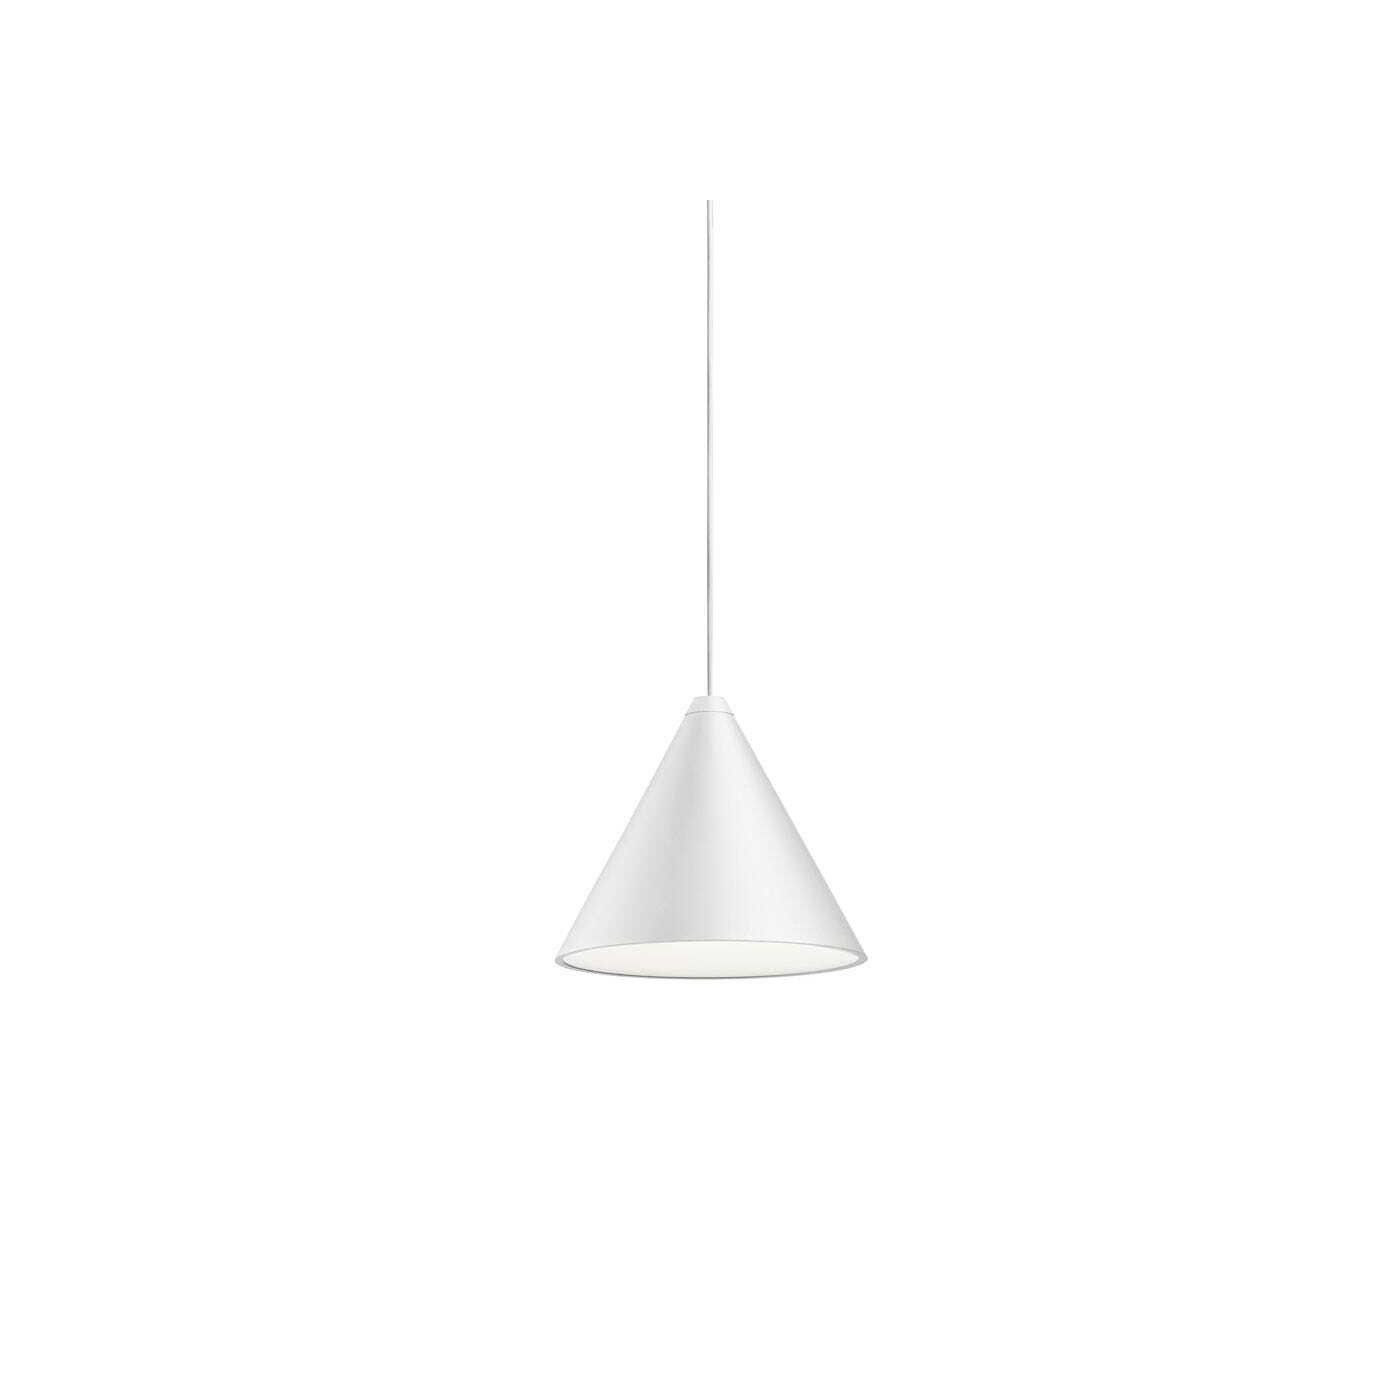 Flos String Light Cone 12M Cable Touch Dim Matt White - image 1